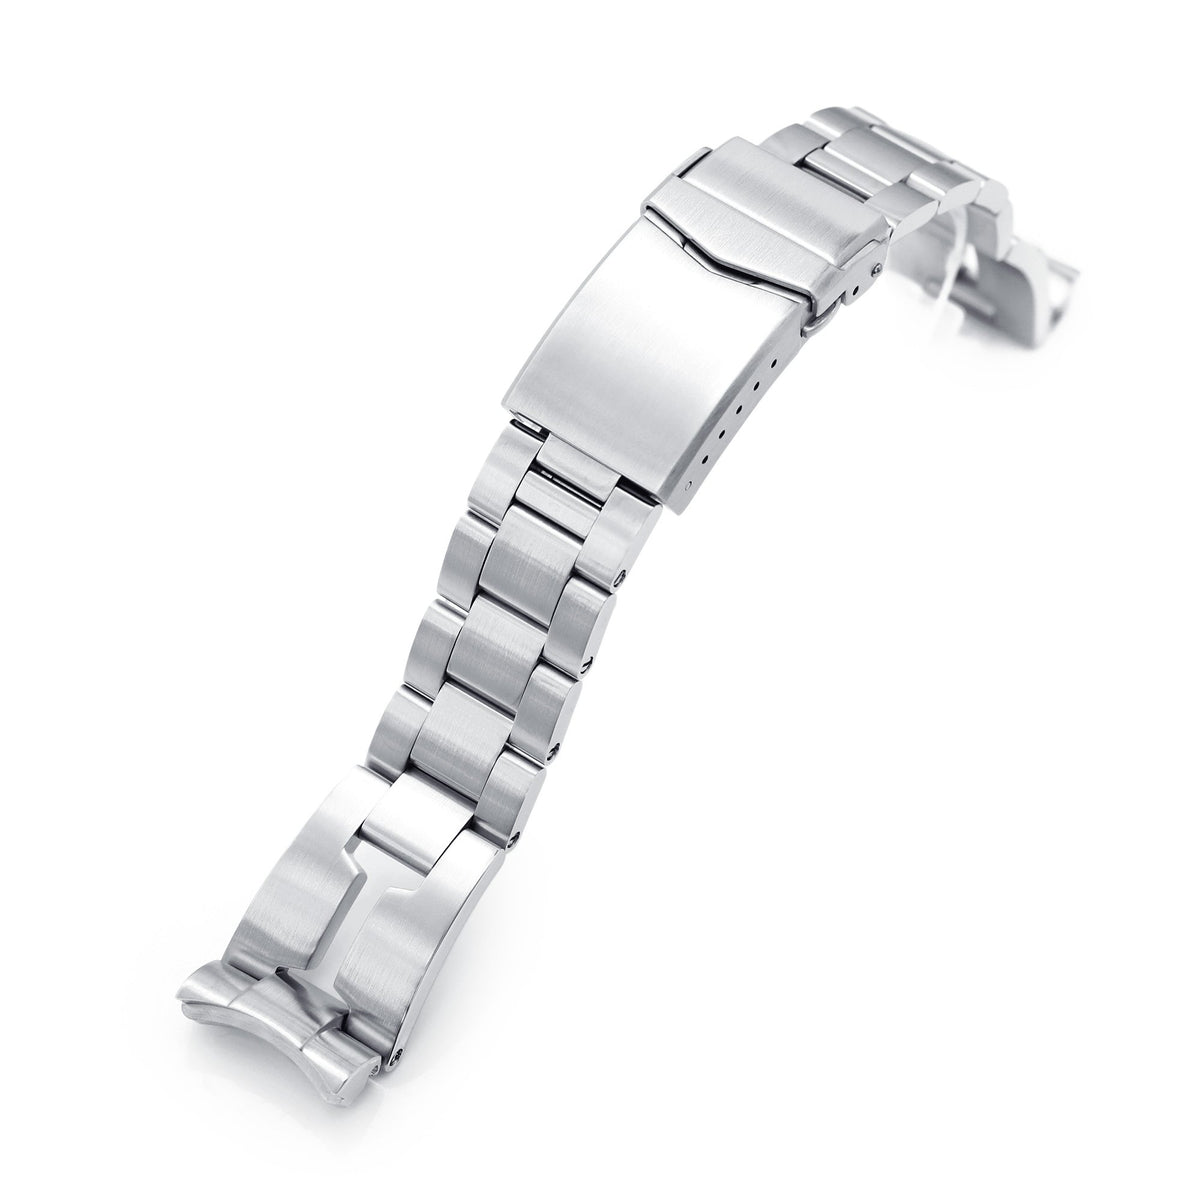 20mm Retro Razor 316L Stainless Steel Watch Bracelet for Seiko Mini Turtles SRPC35 Brushed V-Clasp Strapcode Watch Bands